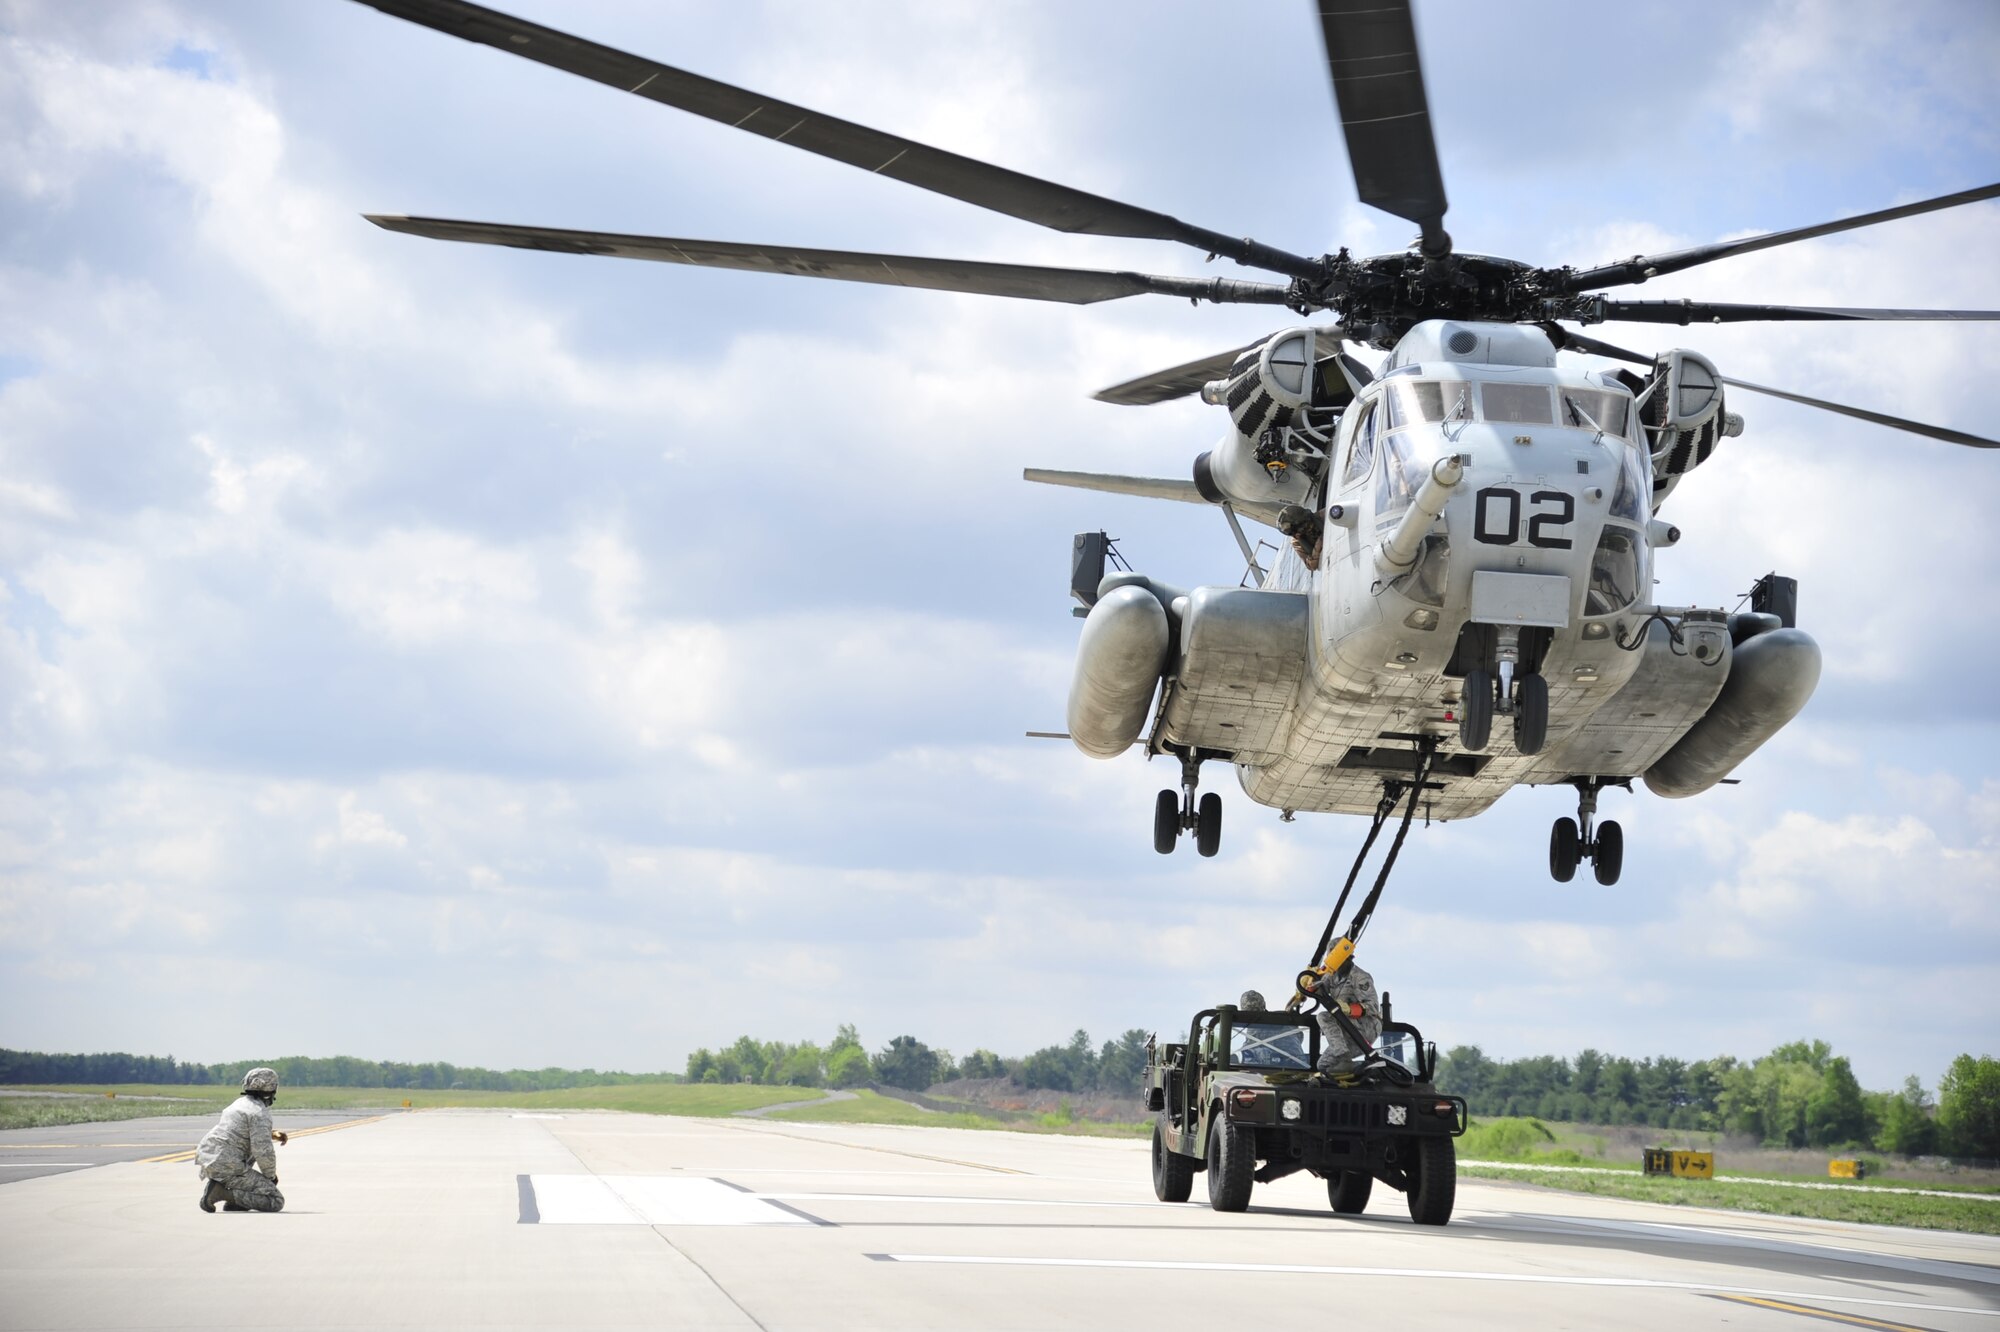 A U.S. Marine Corps CH-53E Super Stallion from Marine Heavy Helicopter Squadron 772 conducts slingload operations with Airmen from the 621st Contingency Response Wing at Joint Base McGuire-Dix-Lakehurst, N.J., May 10. Both units were preparing for the Marine airpower demonstration at the 2012 JB MDL Open House and & Air Show, scheduled for May 12 and 13.  (U.S. Air Force photo by Tech. Sgt. Parker Gyokeres)